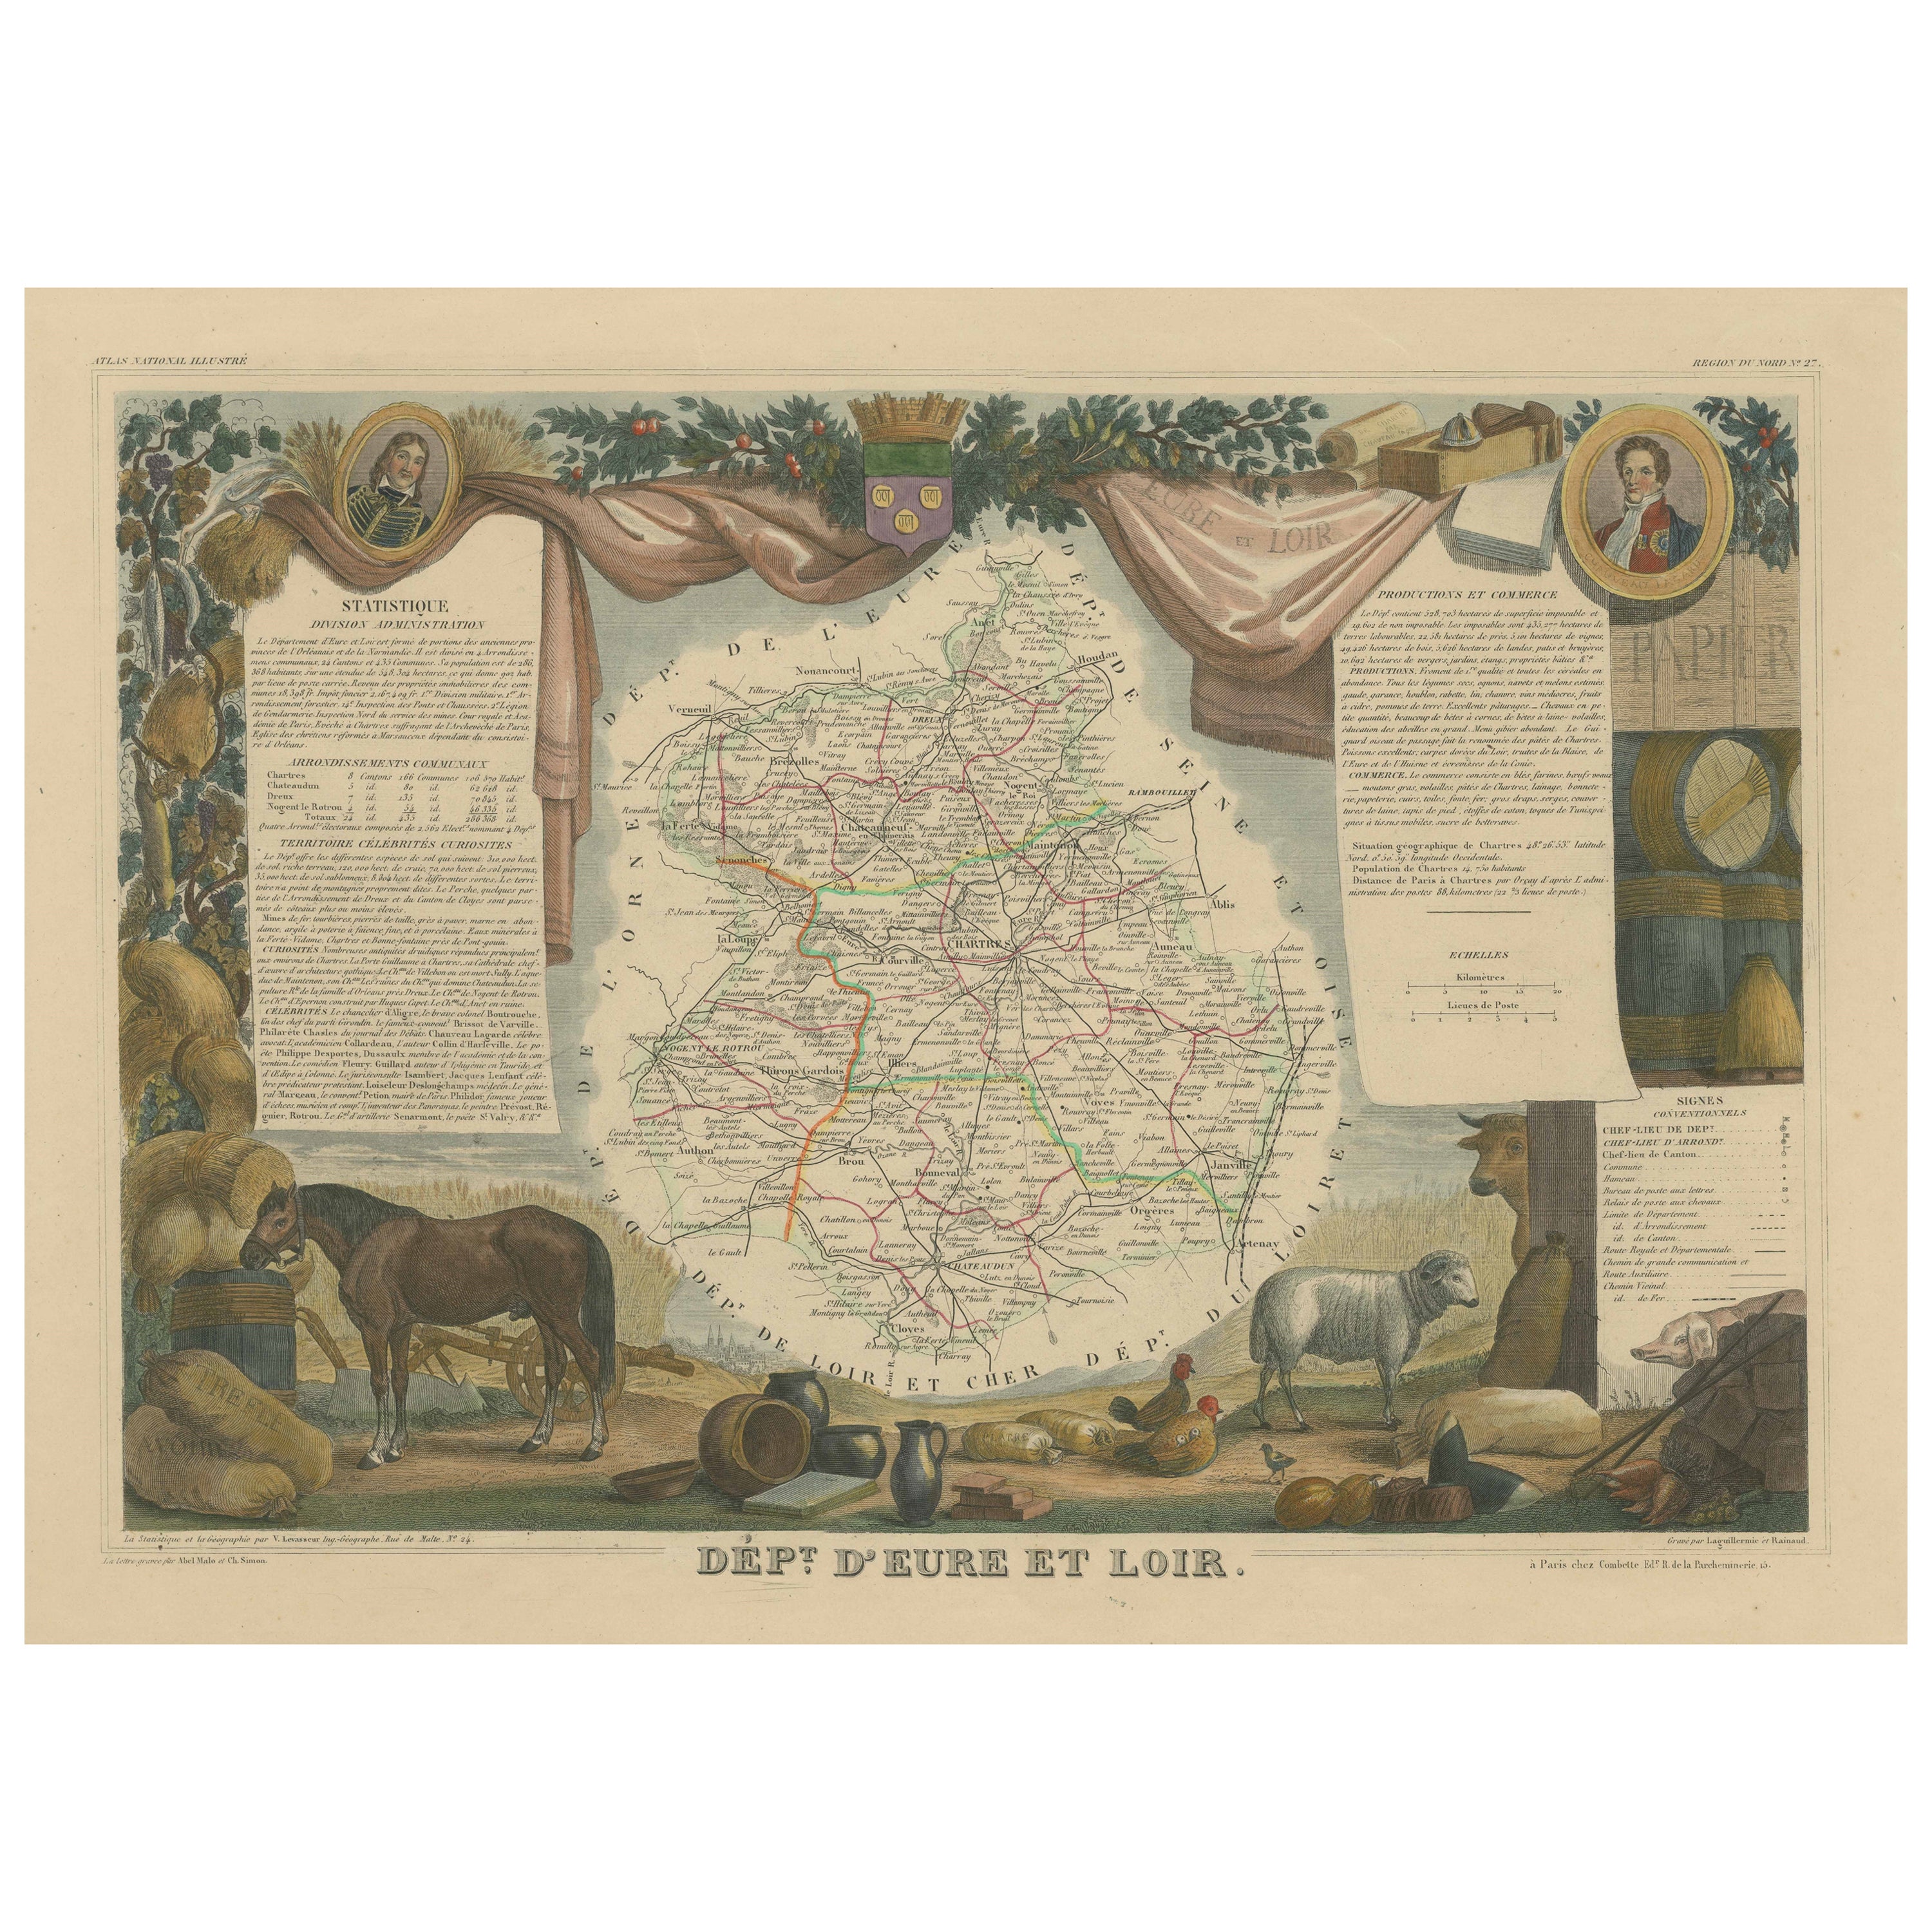 Hand Colored Antique Map of the Department of Eure-et-loir, France